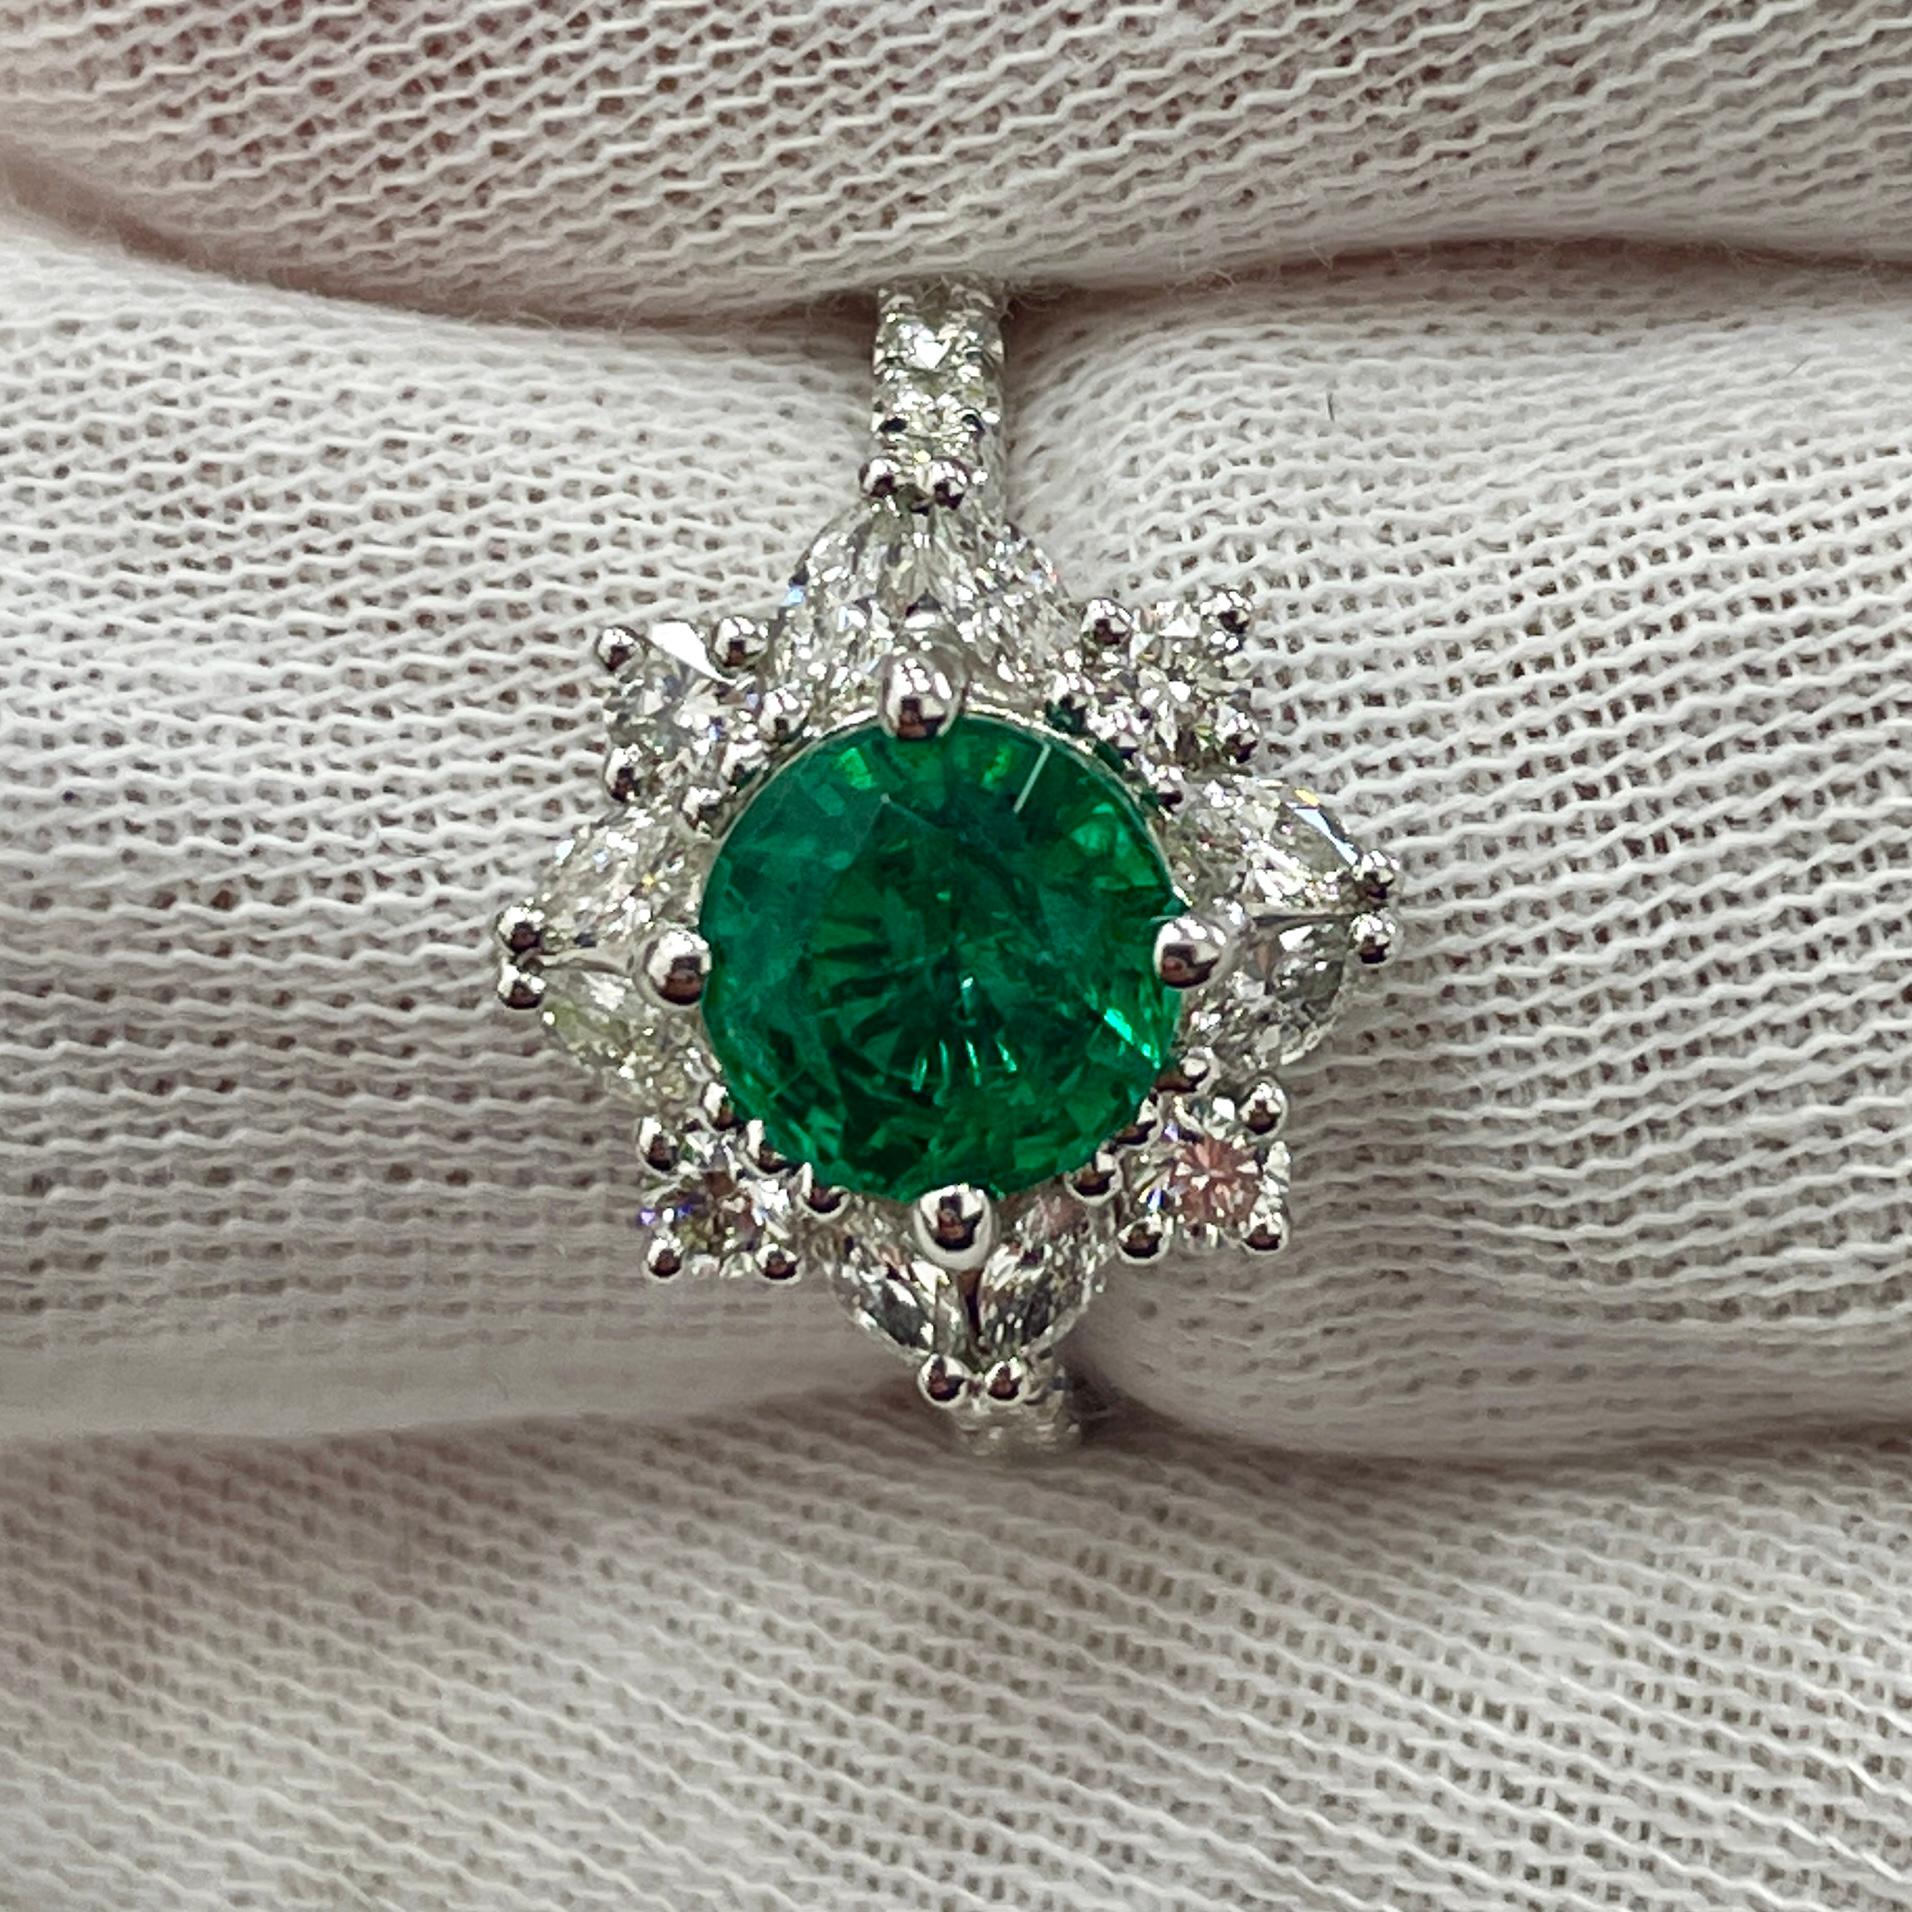 This is a STUNNING emerald with a very lively color, mounted in an elegant 18K white gold and diamond ring with 0.75Ct of brilliant white diamonds. Suitable for any occasion!